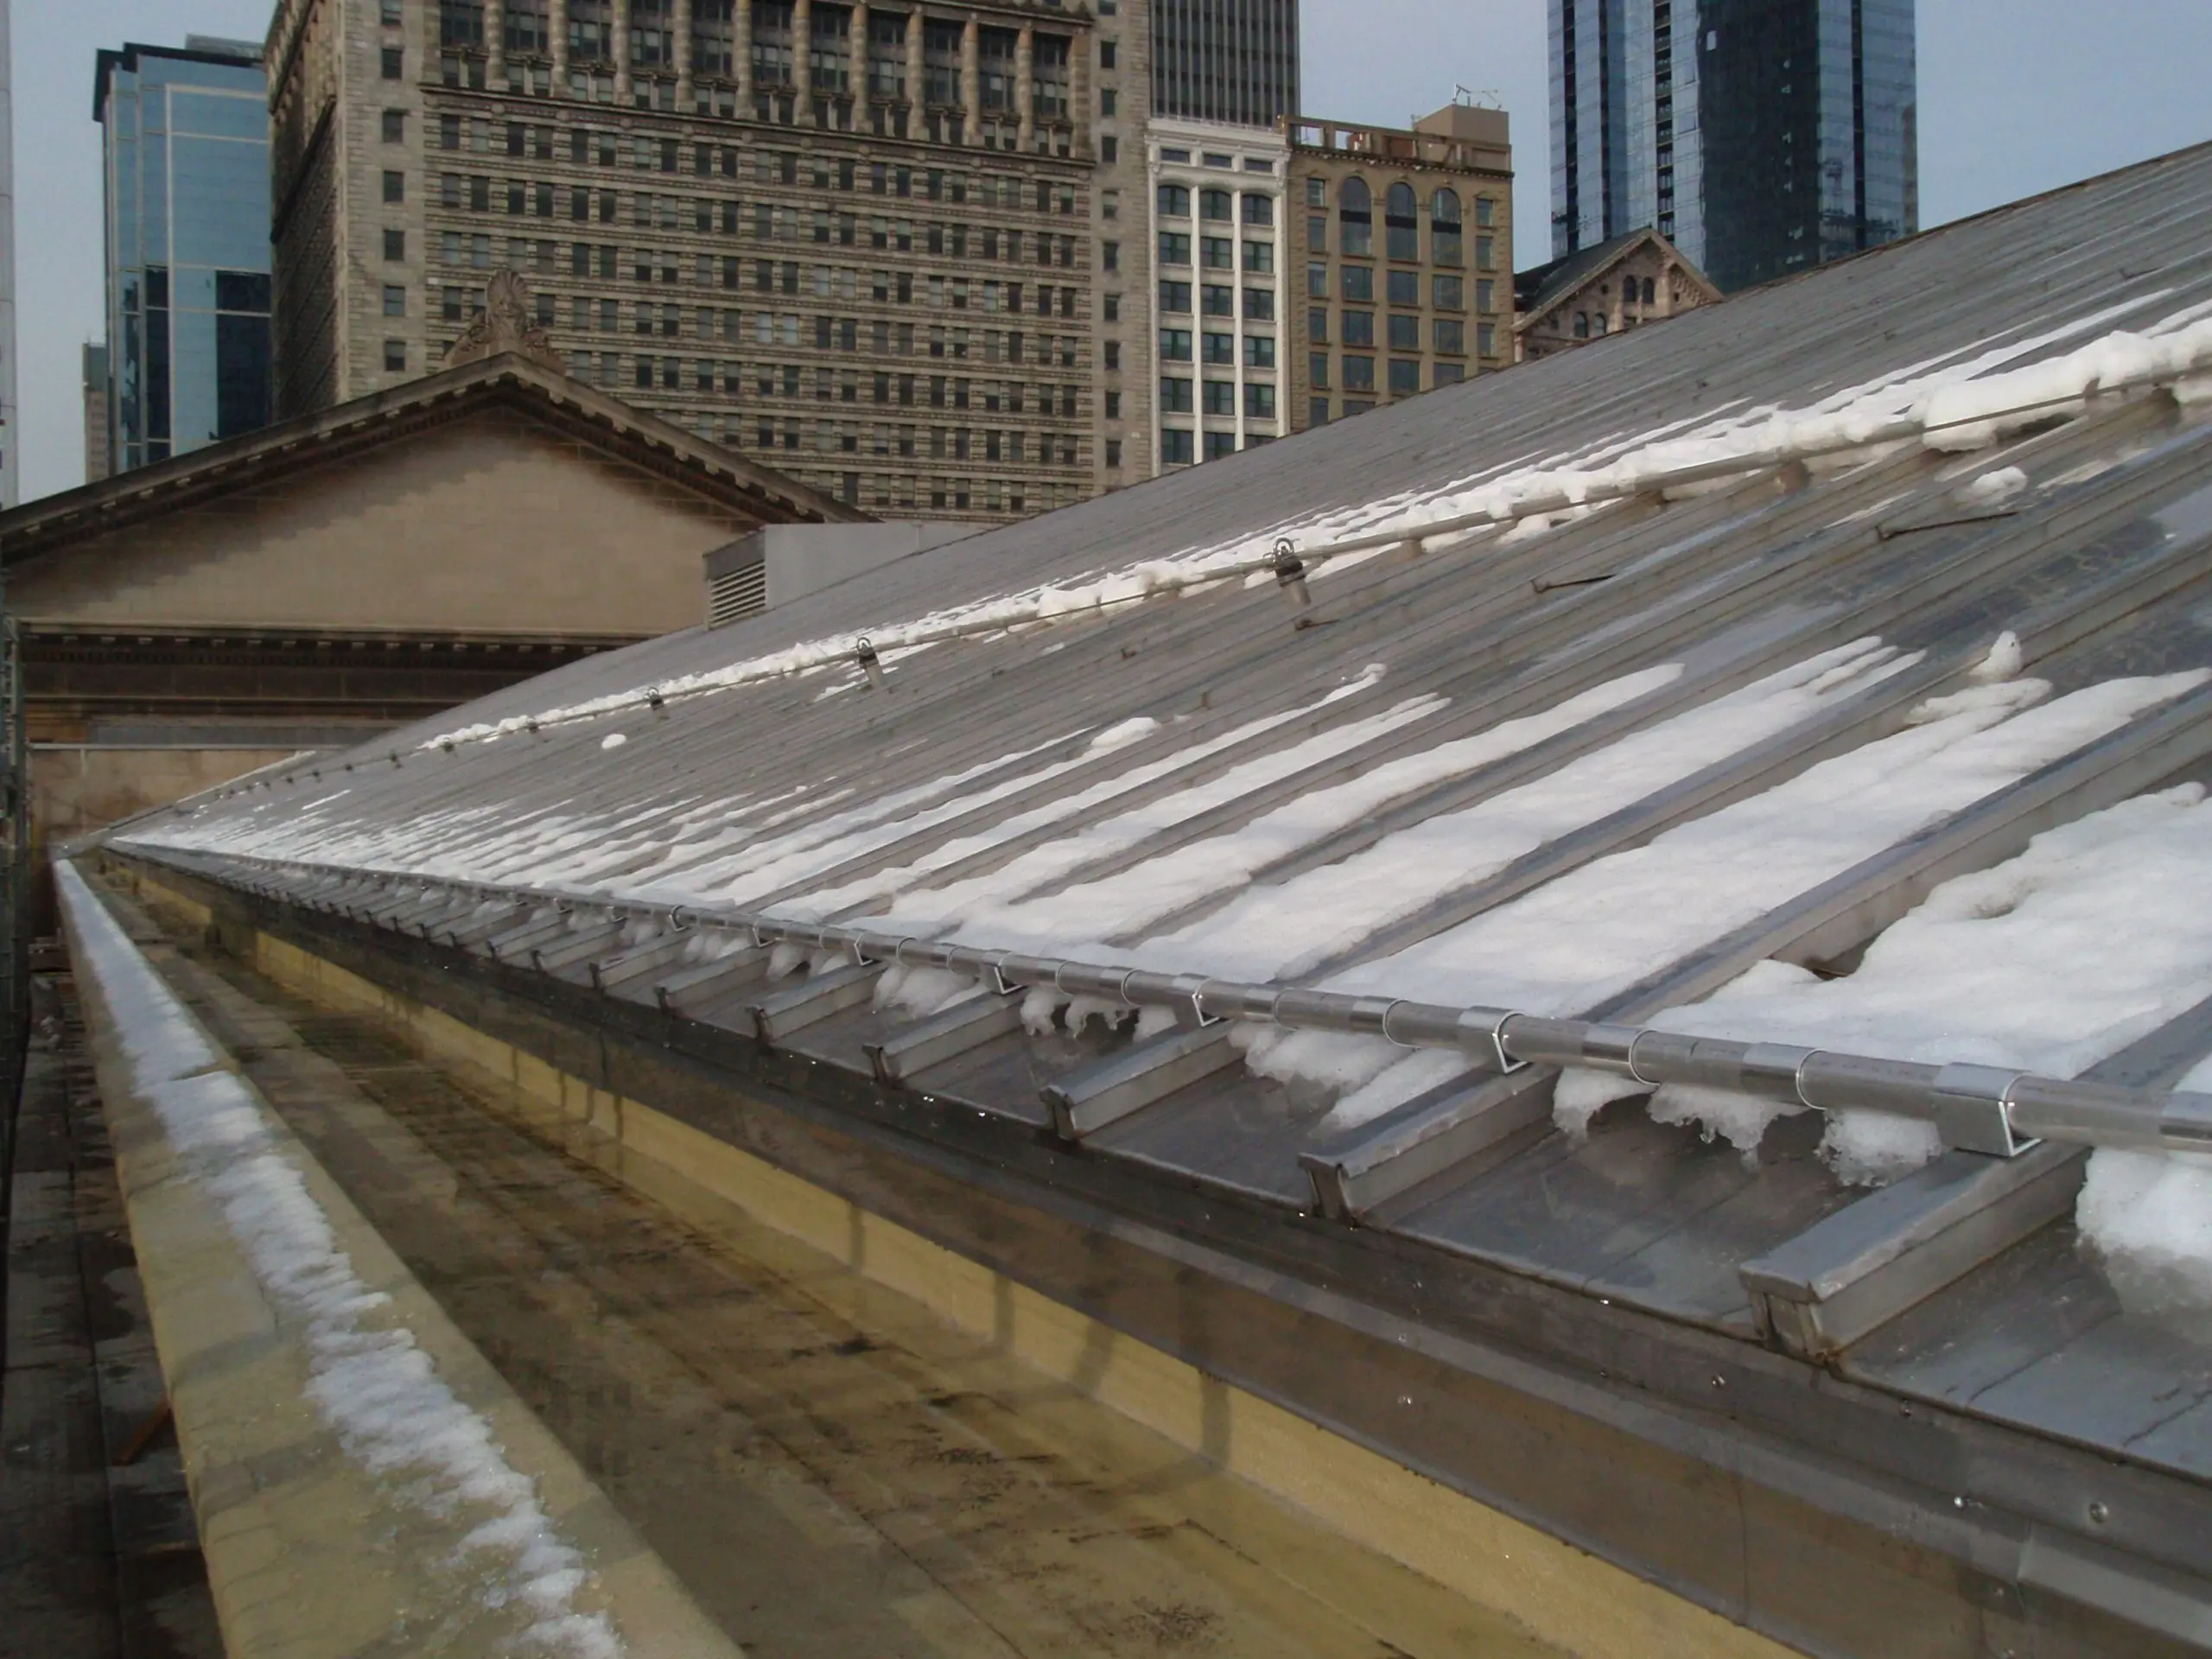 Snow guards for batten seam roofs